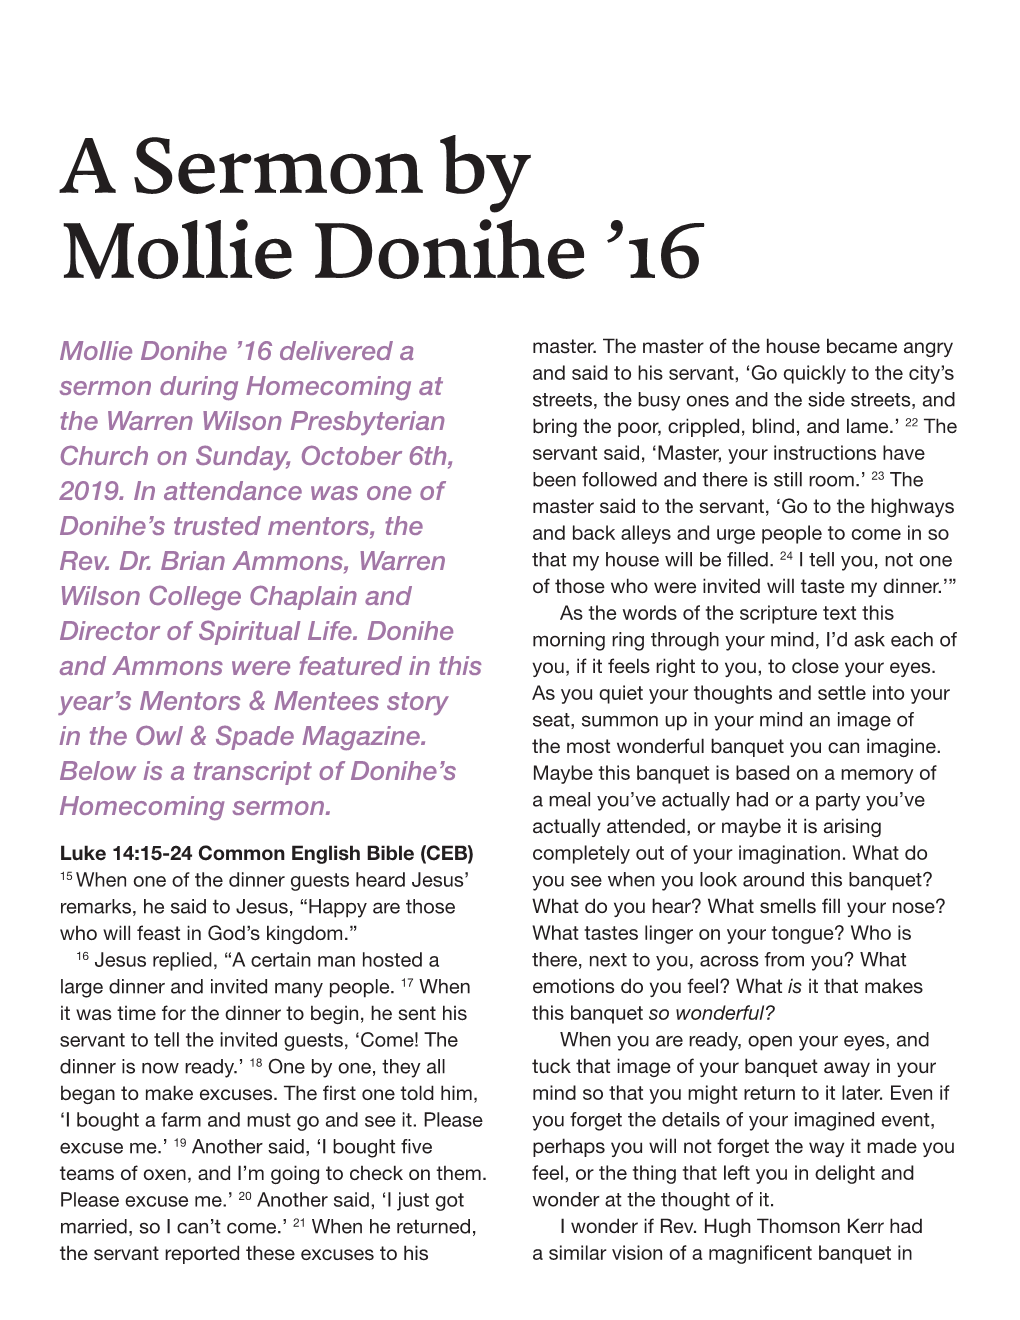 Ministering to Her Mentor: Mollie Donihe's Homecoming Sermon